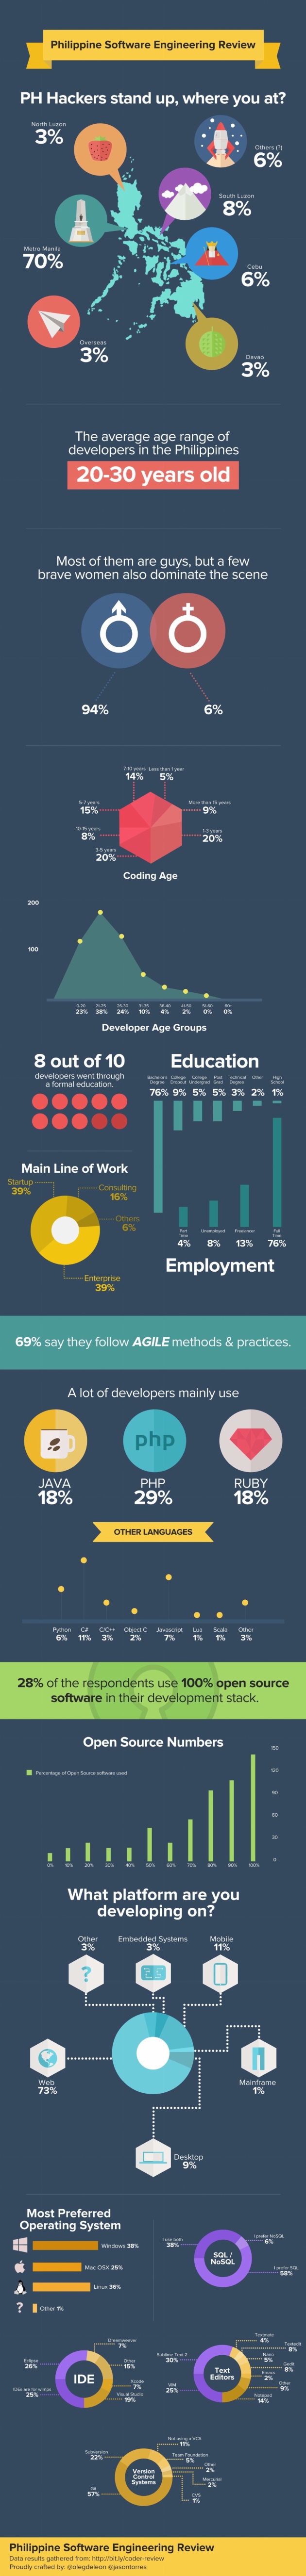 Infographic: Software Engineering Review 2013